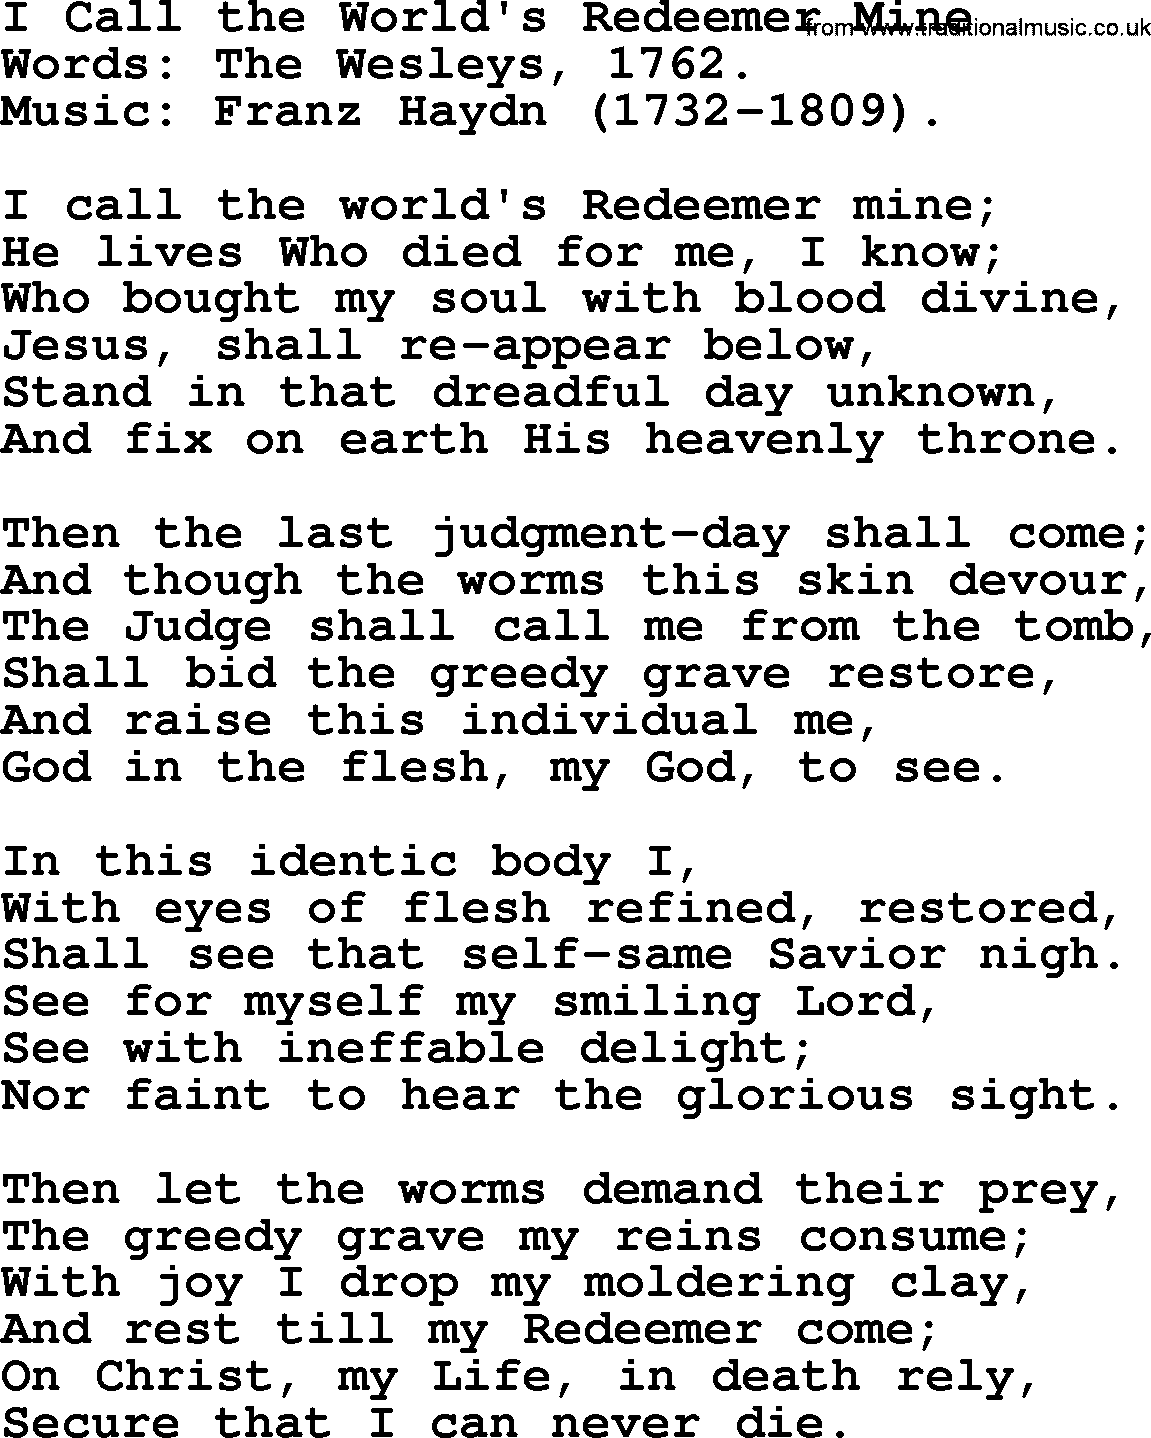 100+ Christian Funeral Hymns collection, Hymn: I Call the World's Redeemer Mine, lyrics and PDF